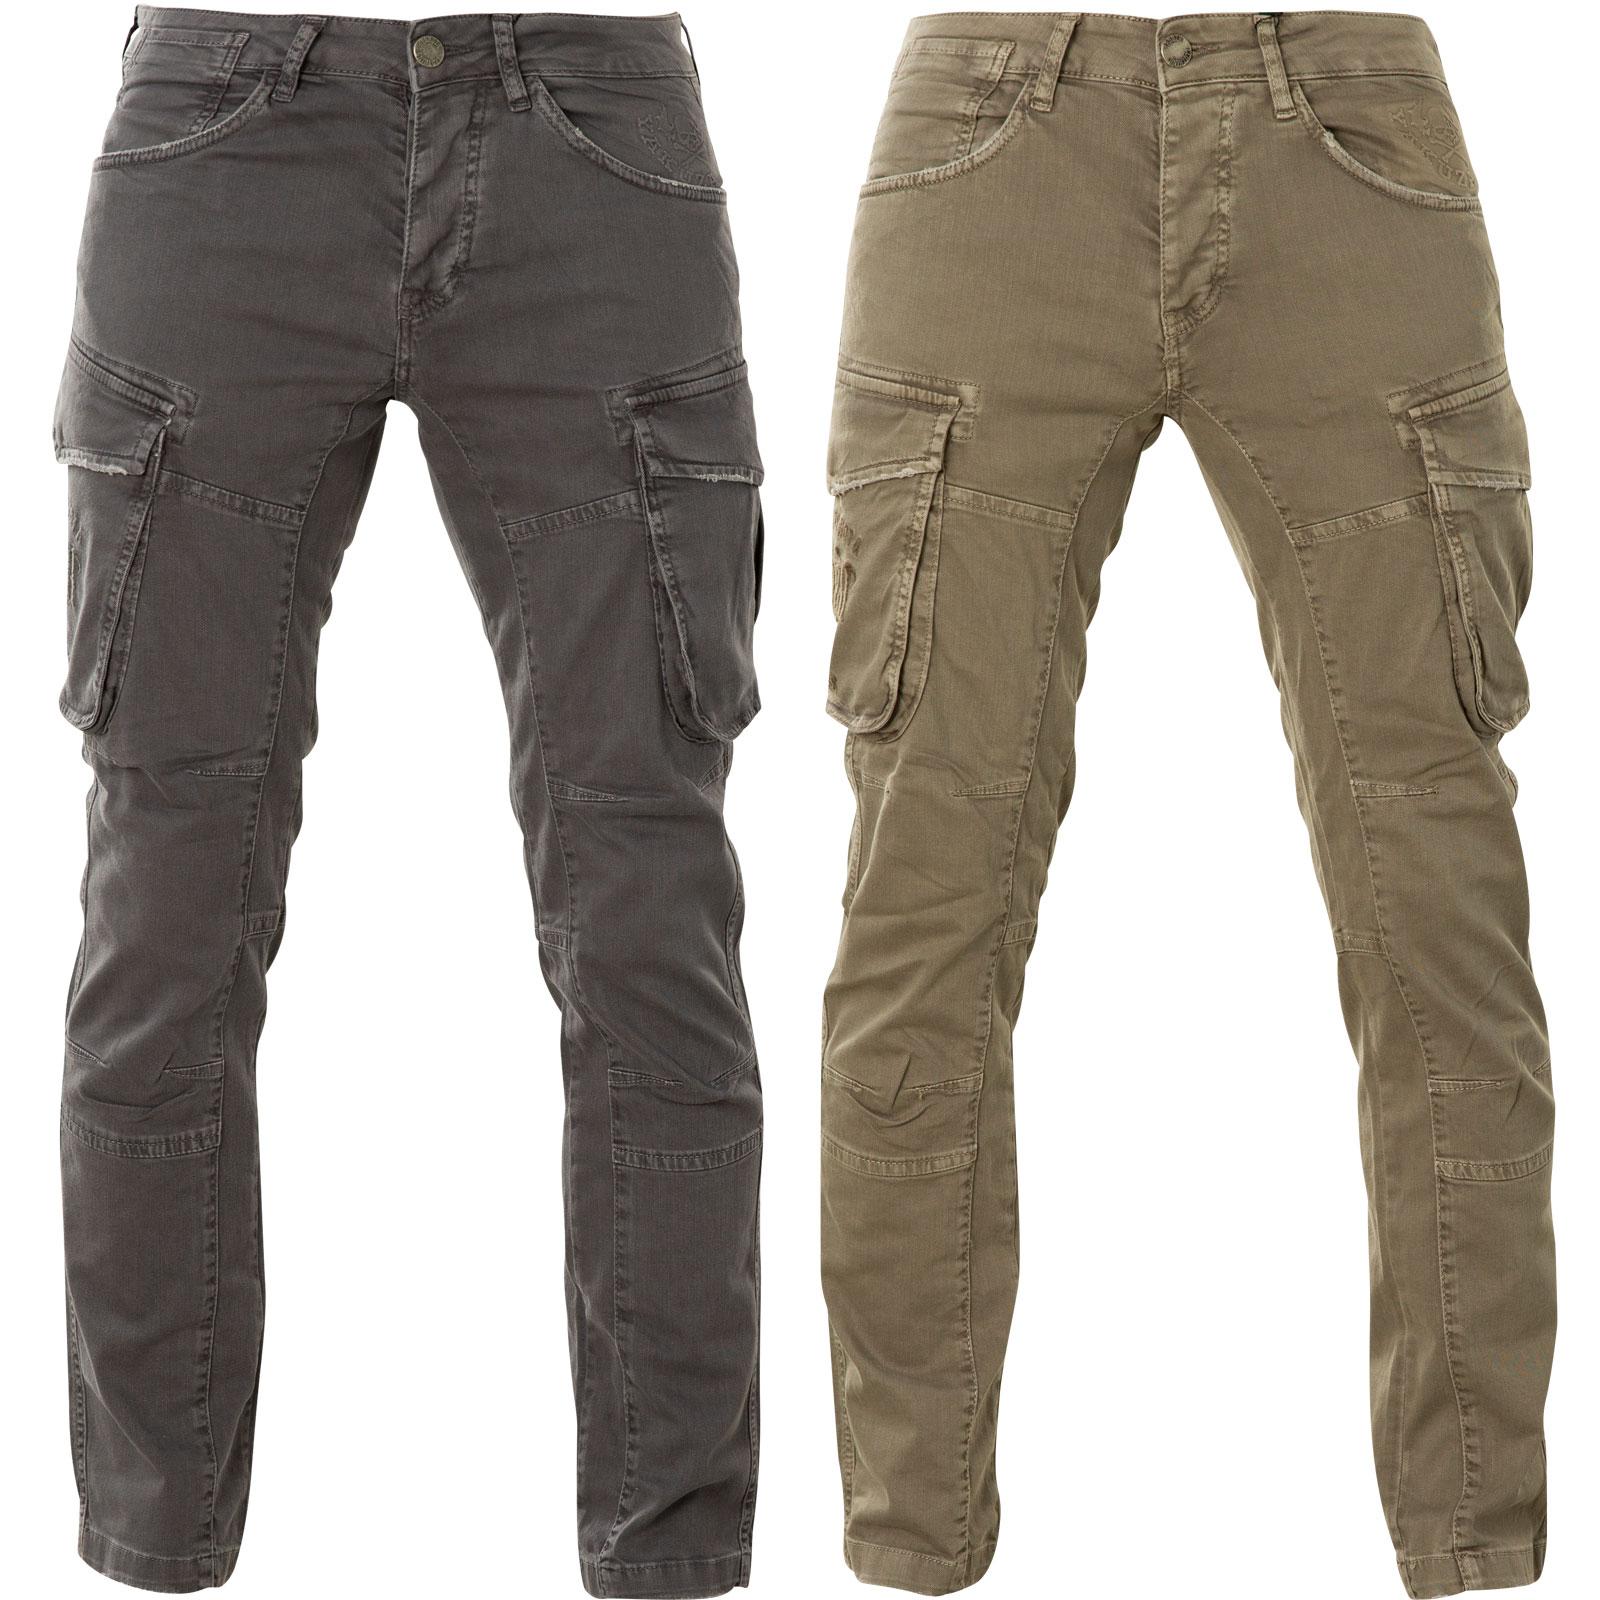 old cargo pants